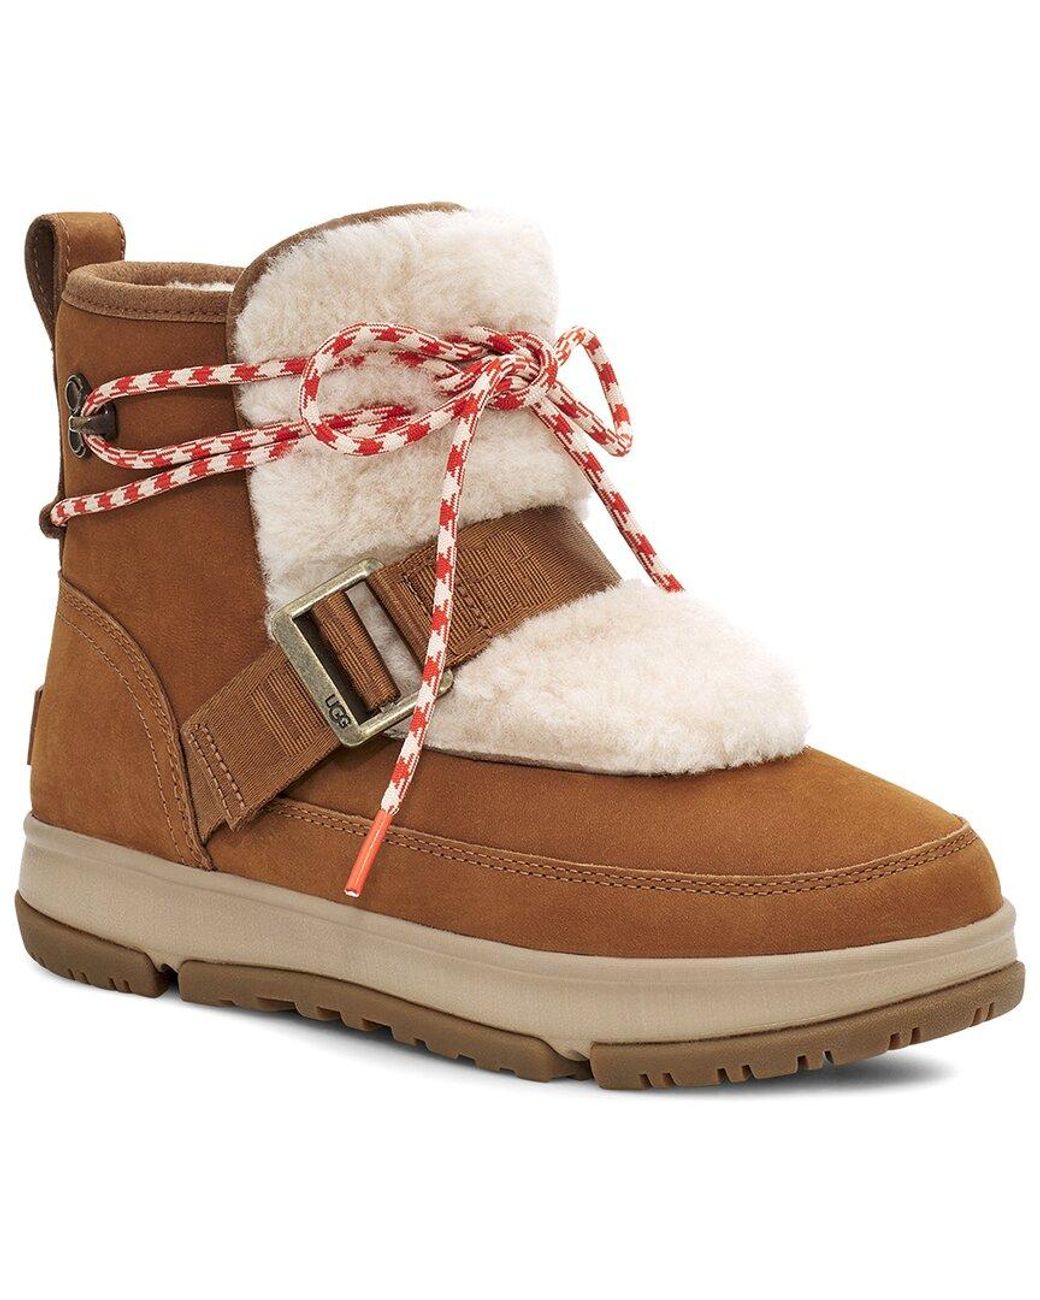 Ugg Winter Boots Are on Sale at Rue La La: What to Buy